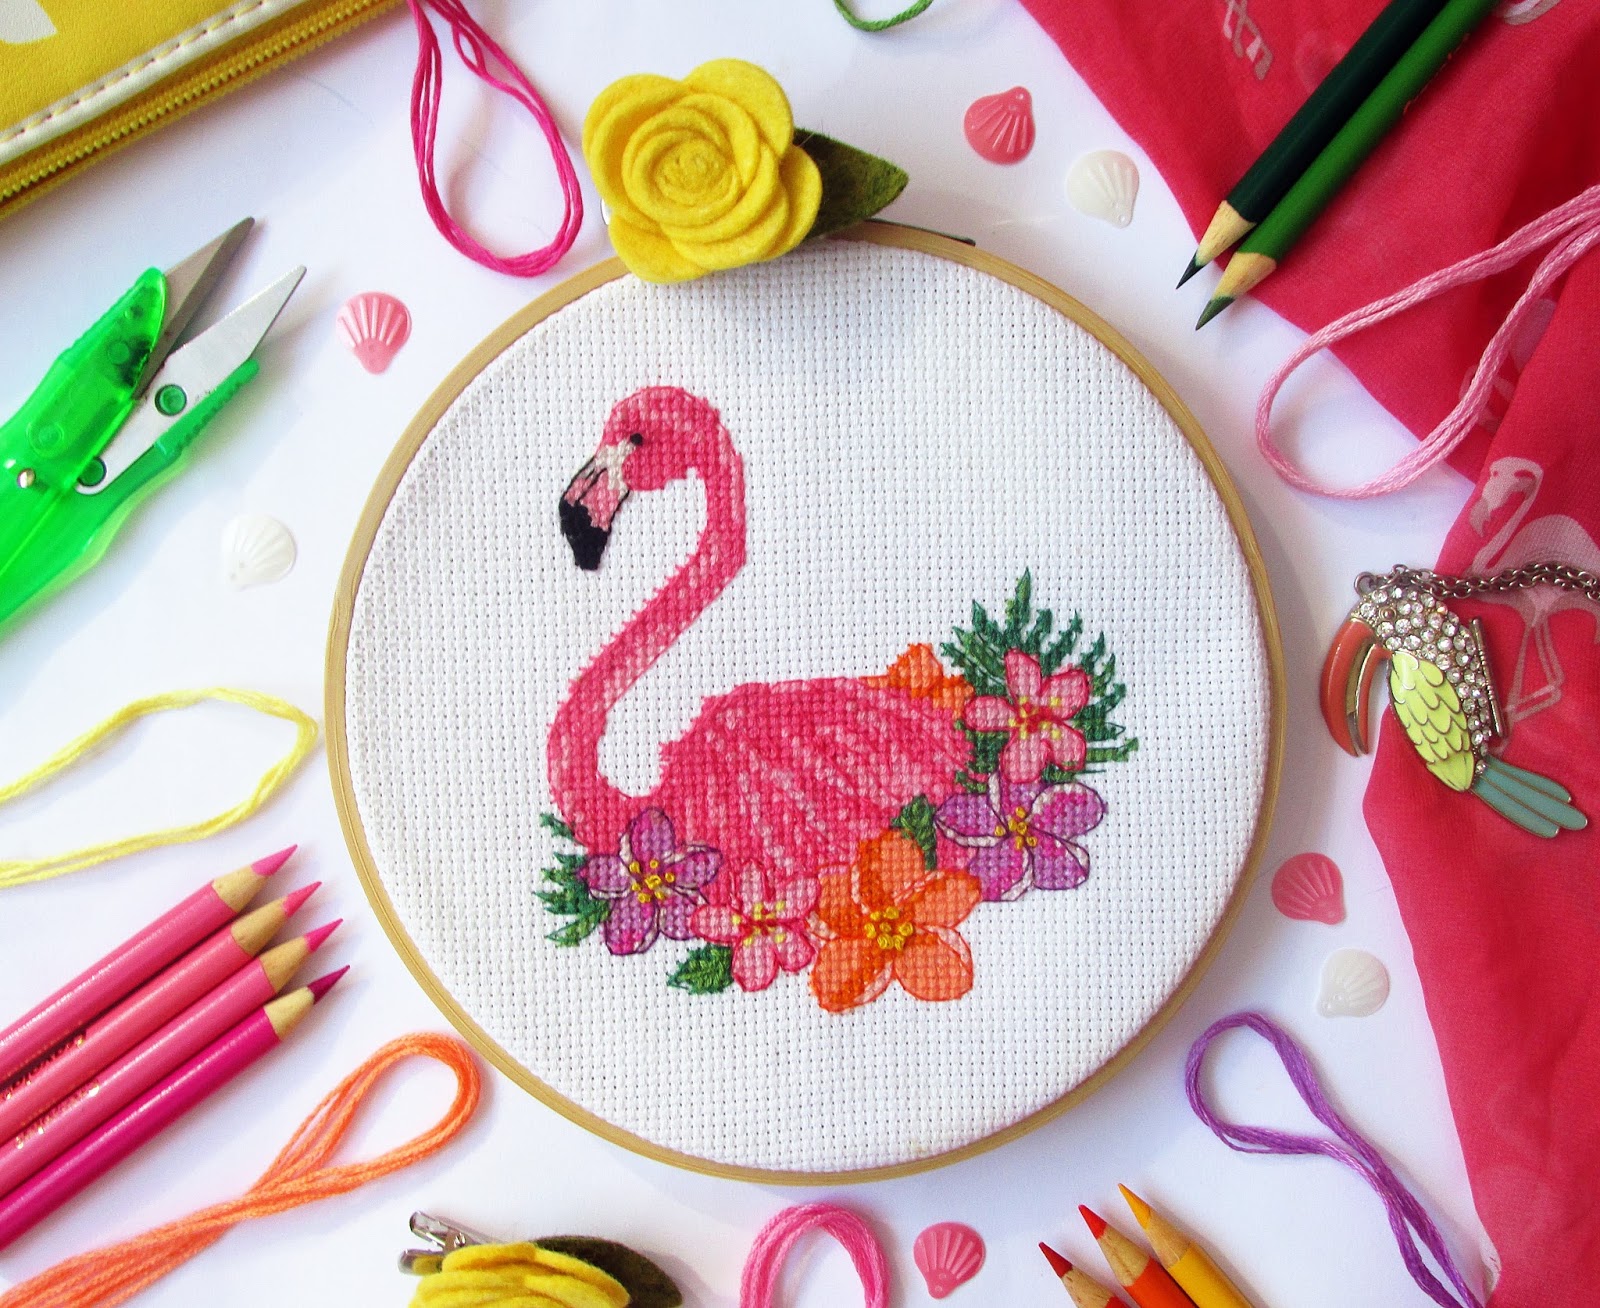 hobbycraft-flamingo-cross-stitch-hoop-kit-polka-spots-and-freckle-dots